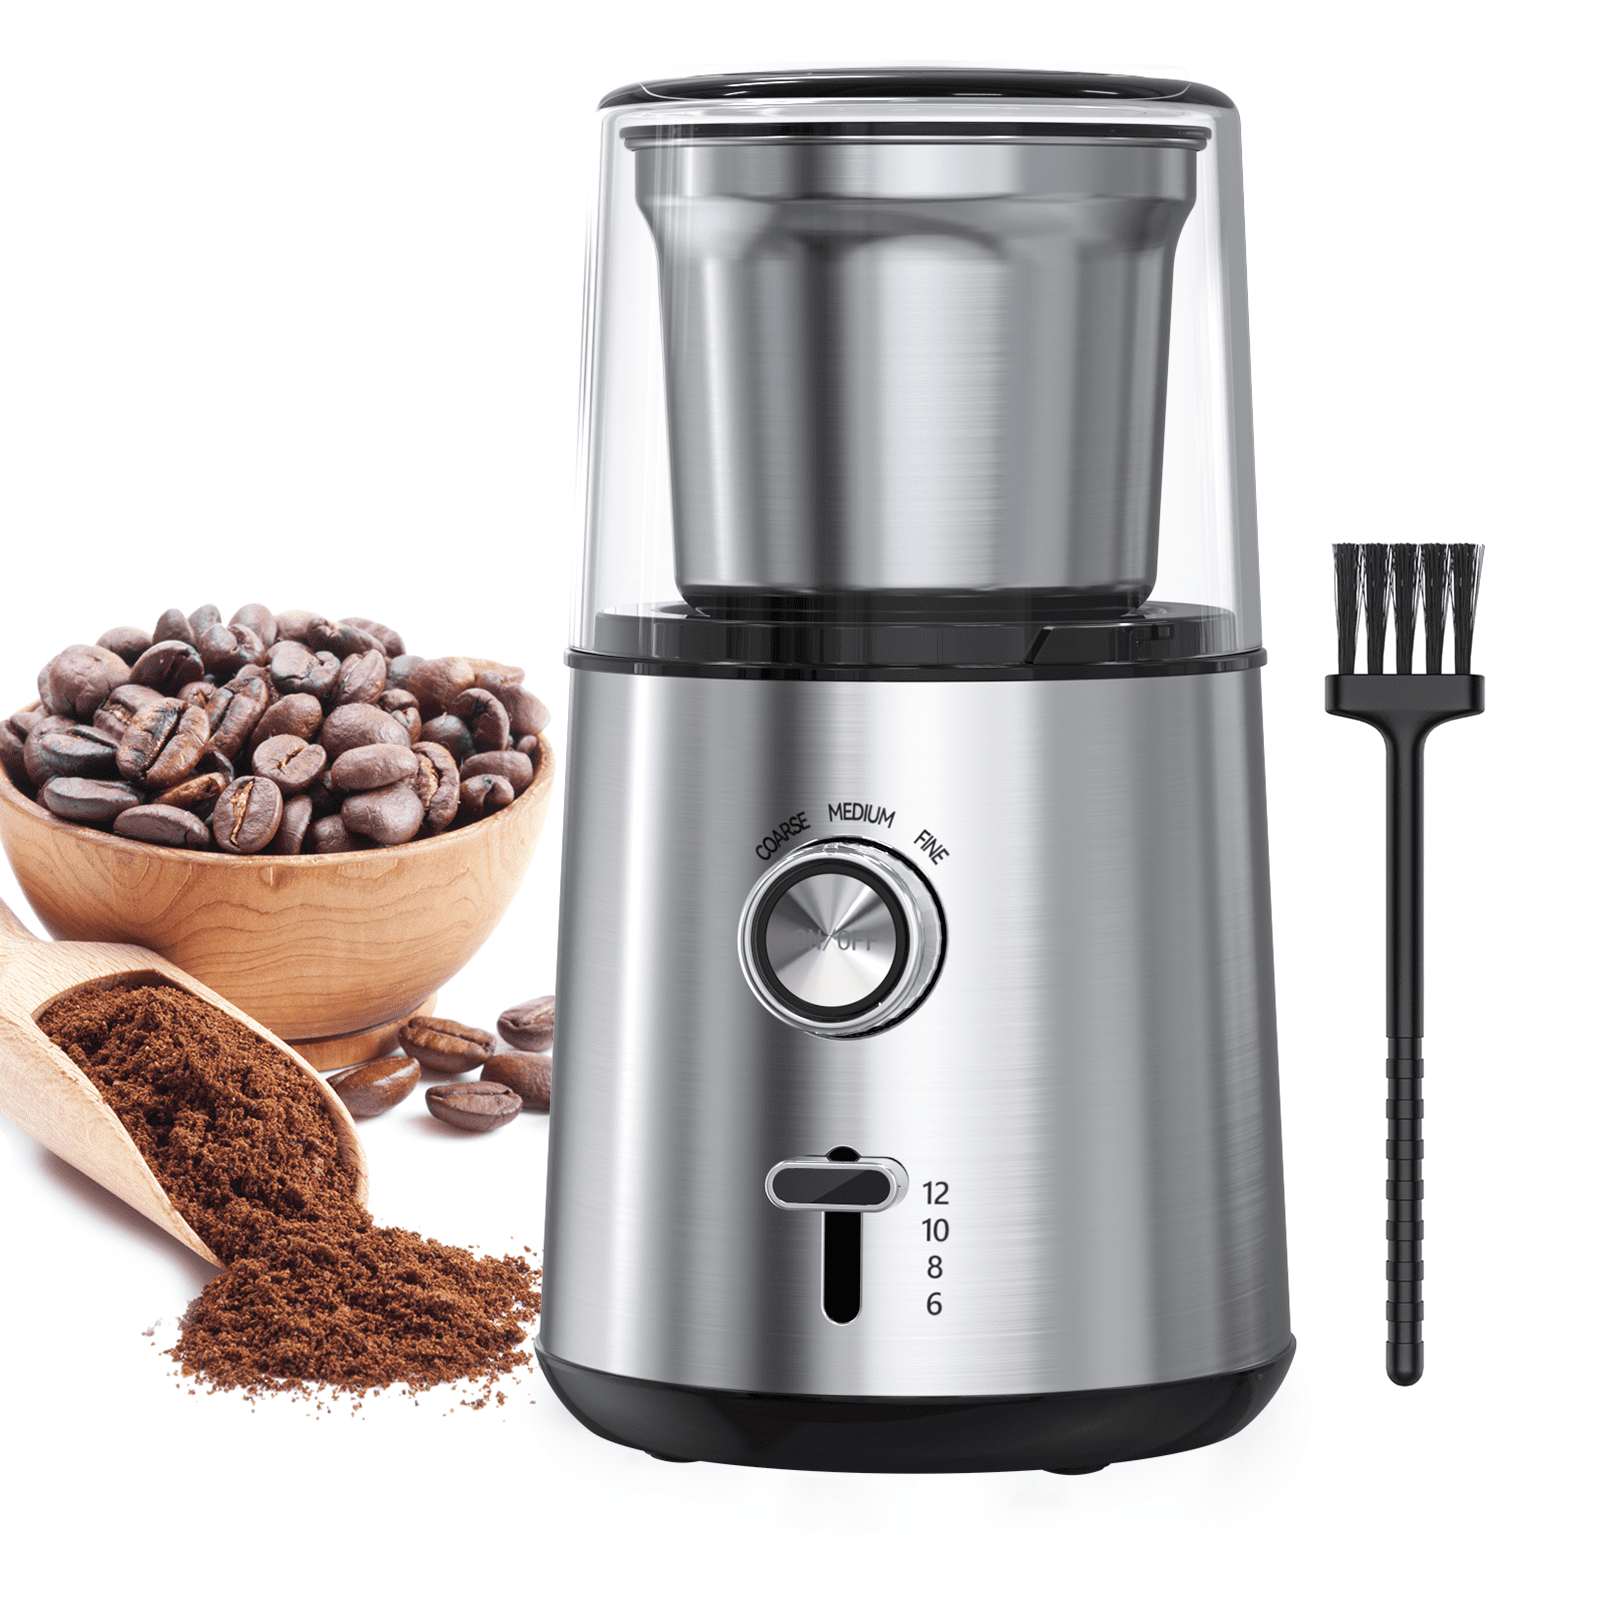 Black COSORI Coffee Grinder Electric, Coffee Beans Grinder, Espresso  Grinder, Coffee Mill also for Spices, Herbs, Grains, Wet and Dry